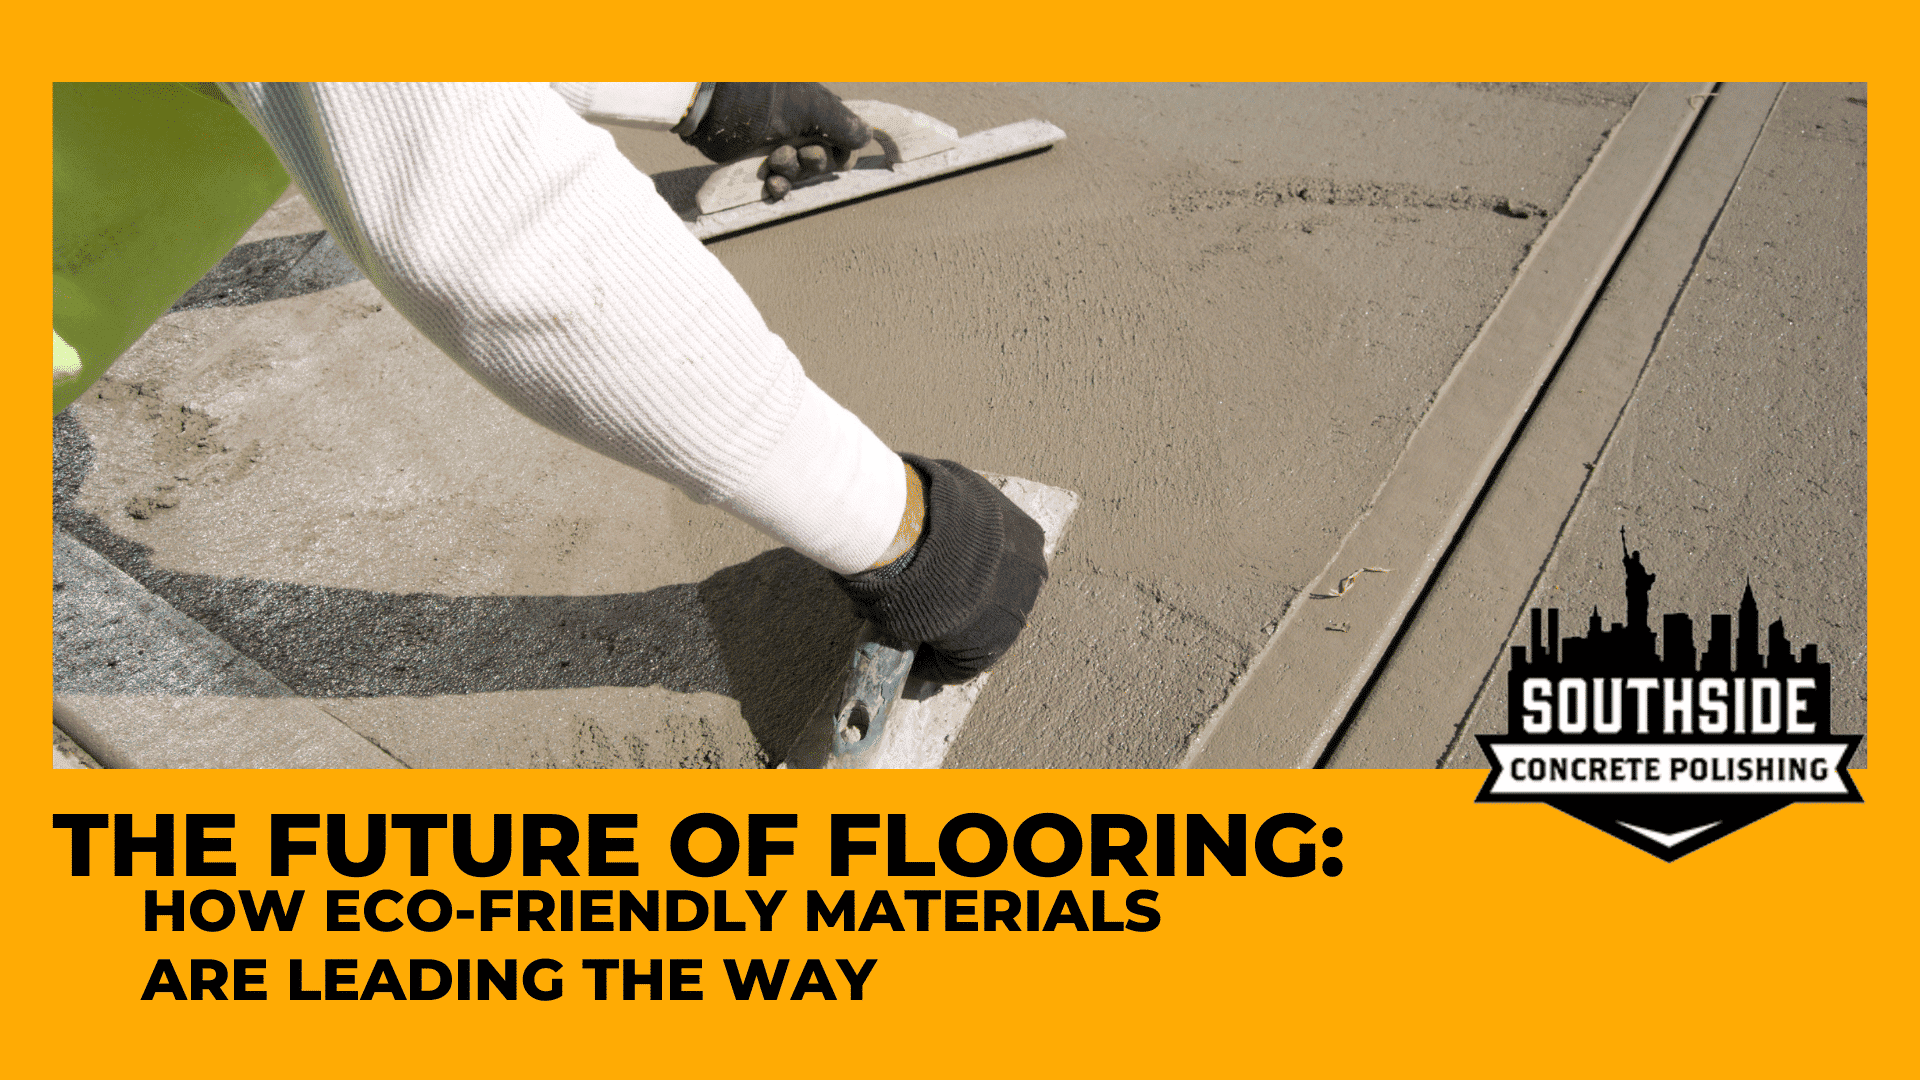 The Future of Flooring: How Eco-Friendly Materials are Leading the Way 4